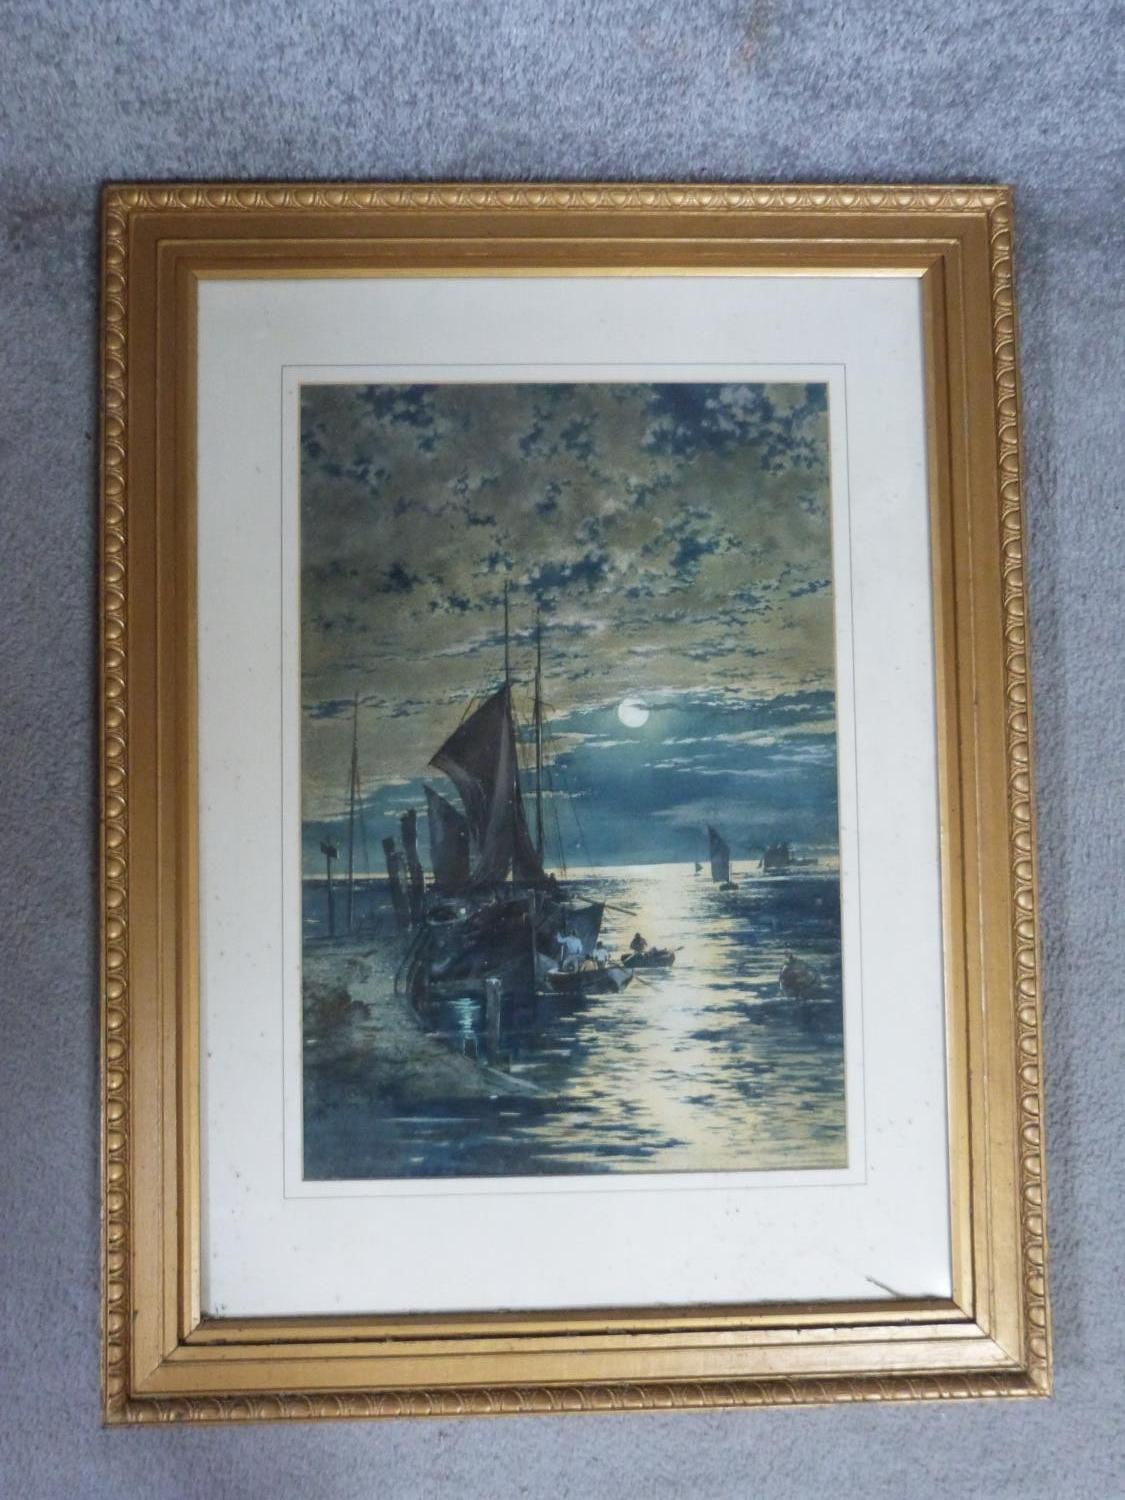 A 19th century framed and glazed watercolour of sailing boats by moonlight on the water. - Image 2 of 4